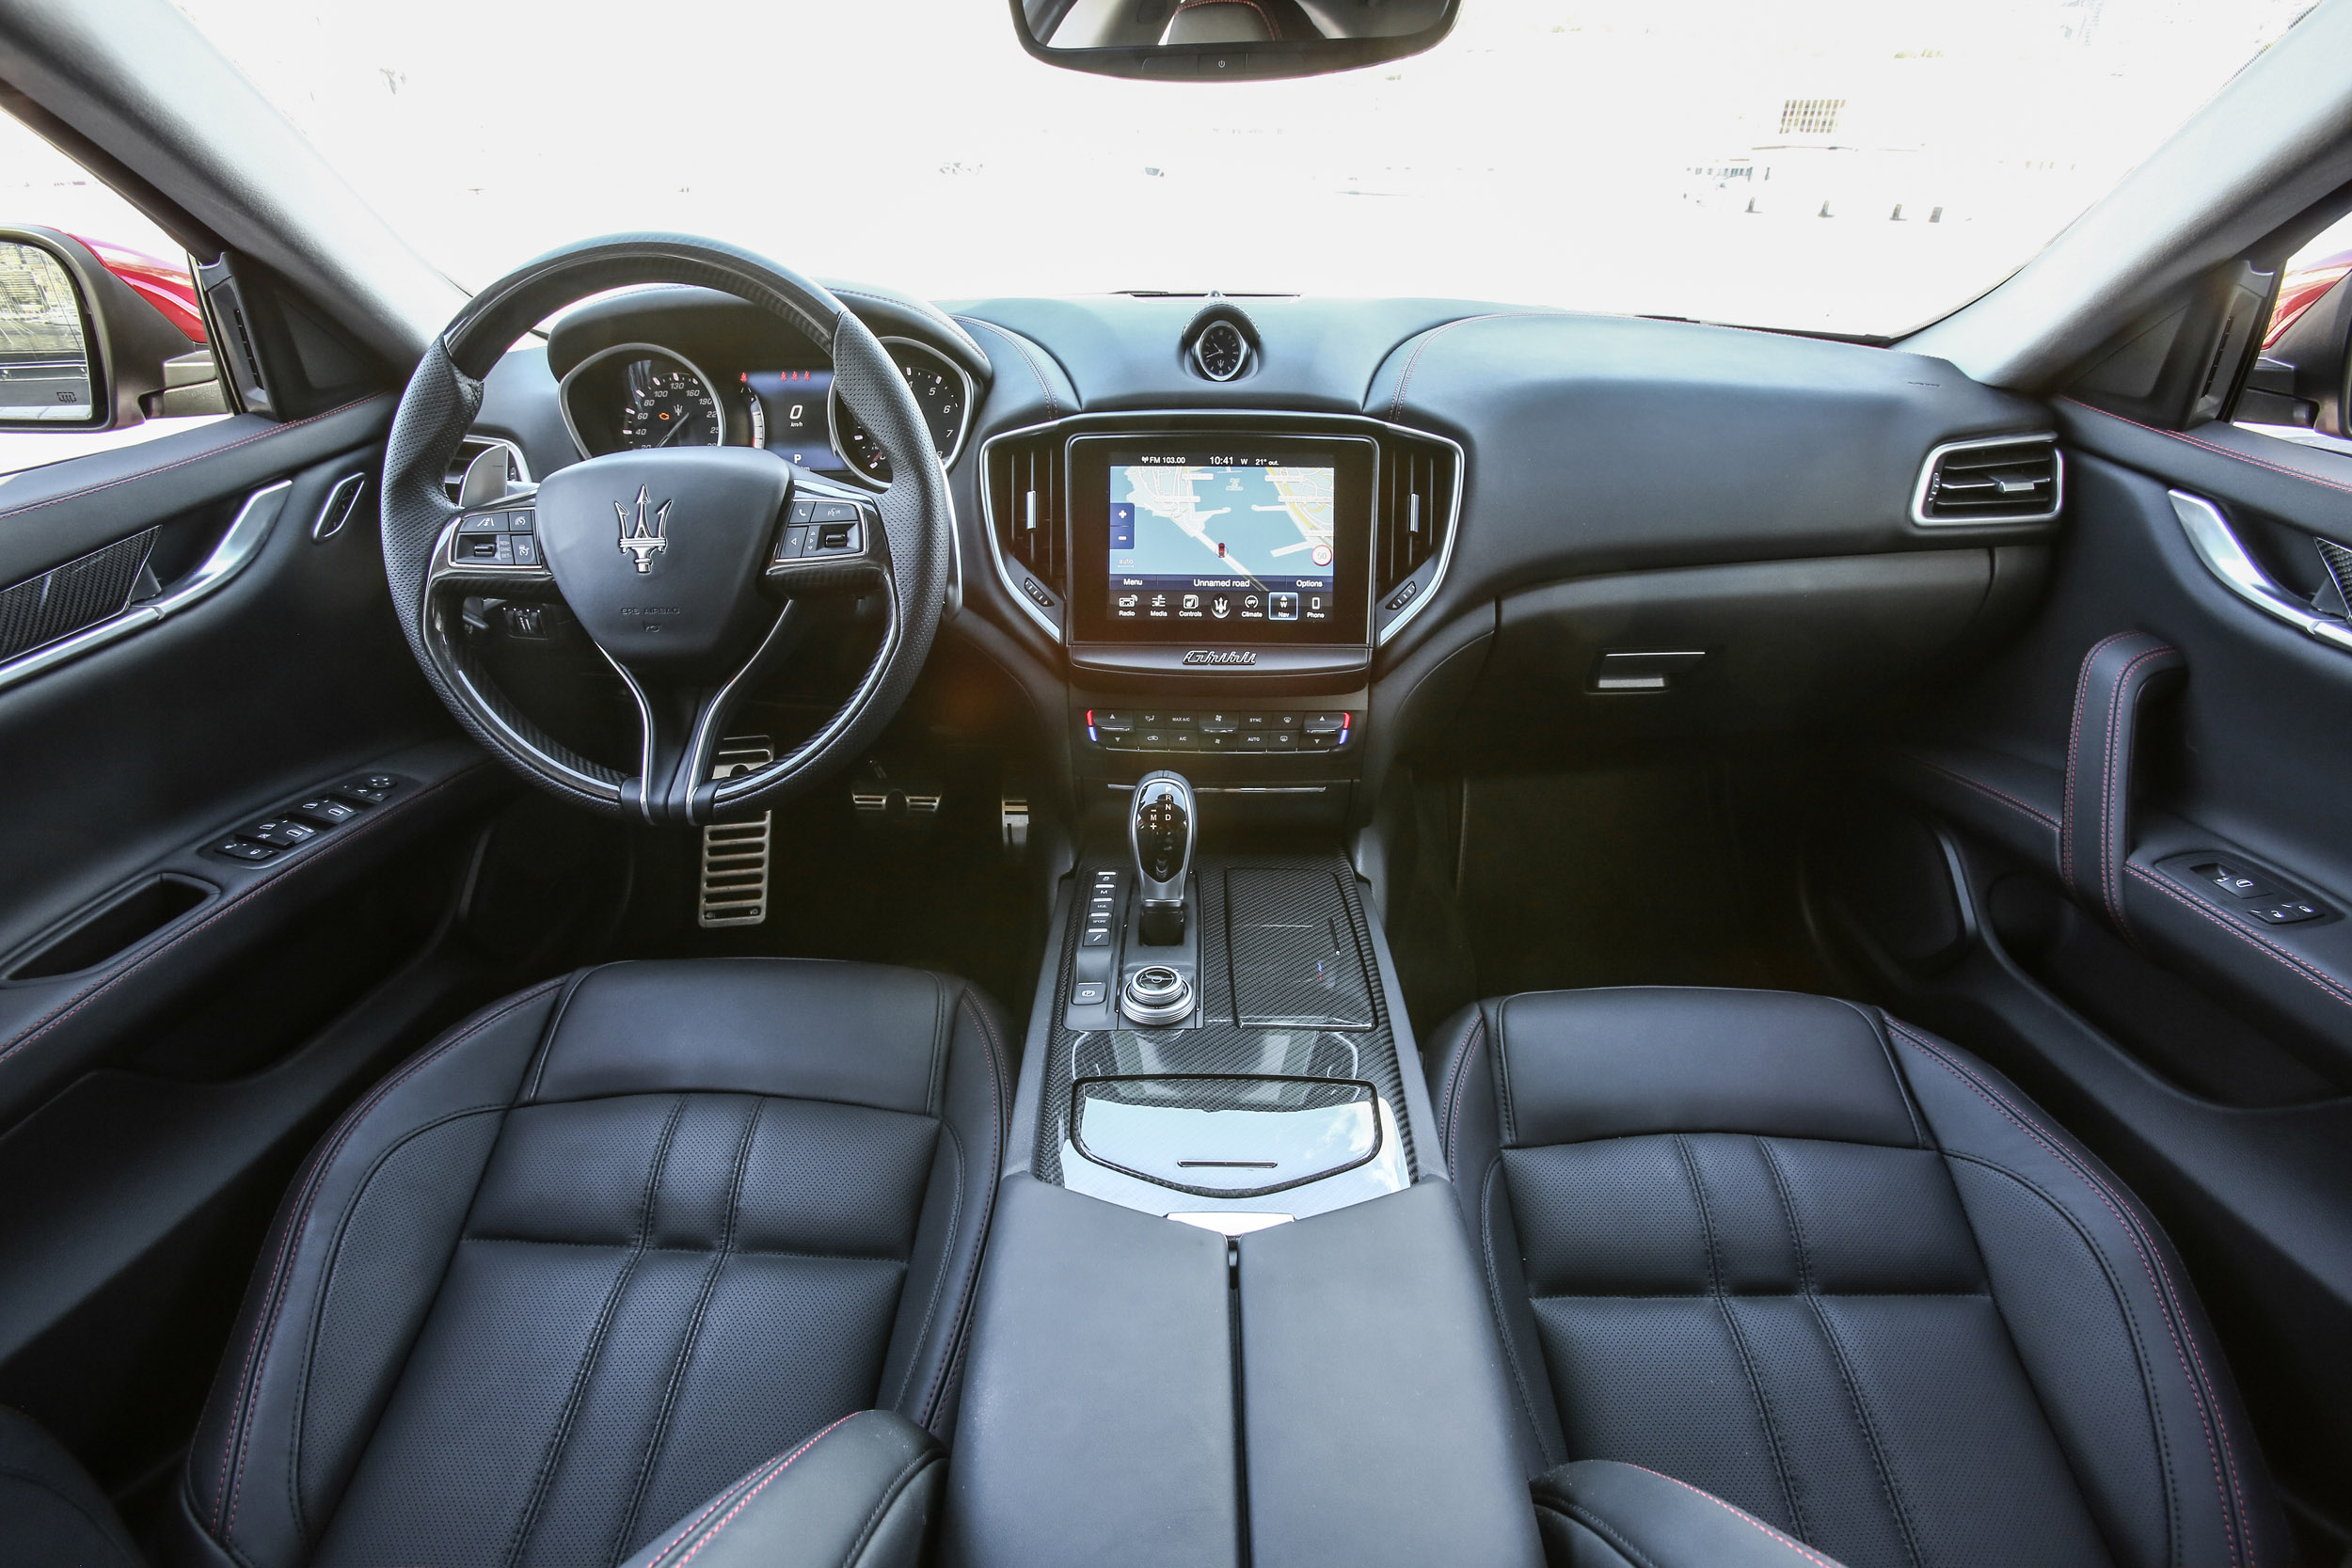 Maserati Ghibli Review Can The Italian Exec Live With The